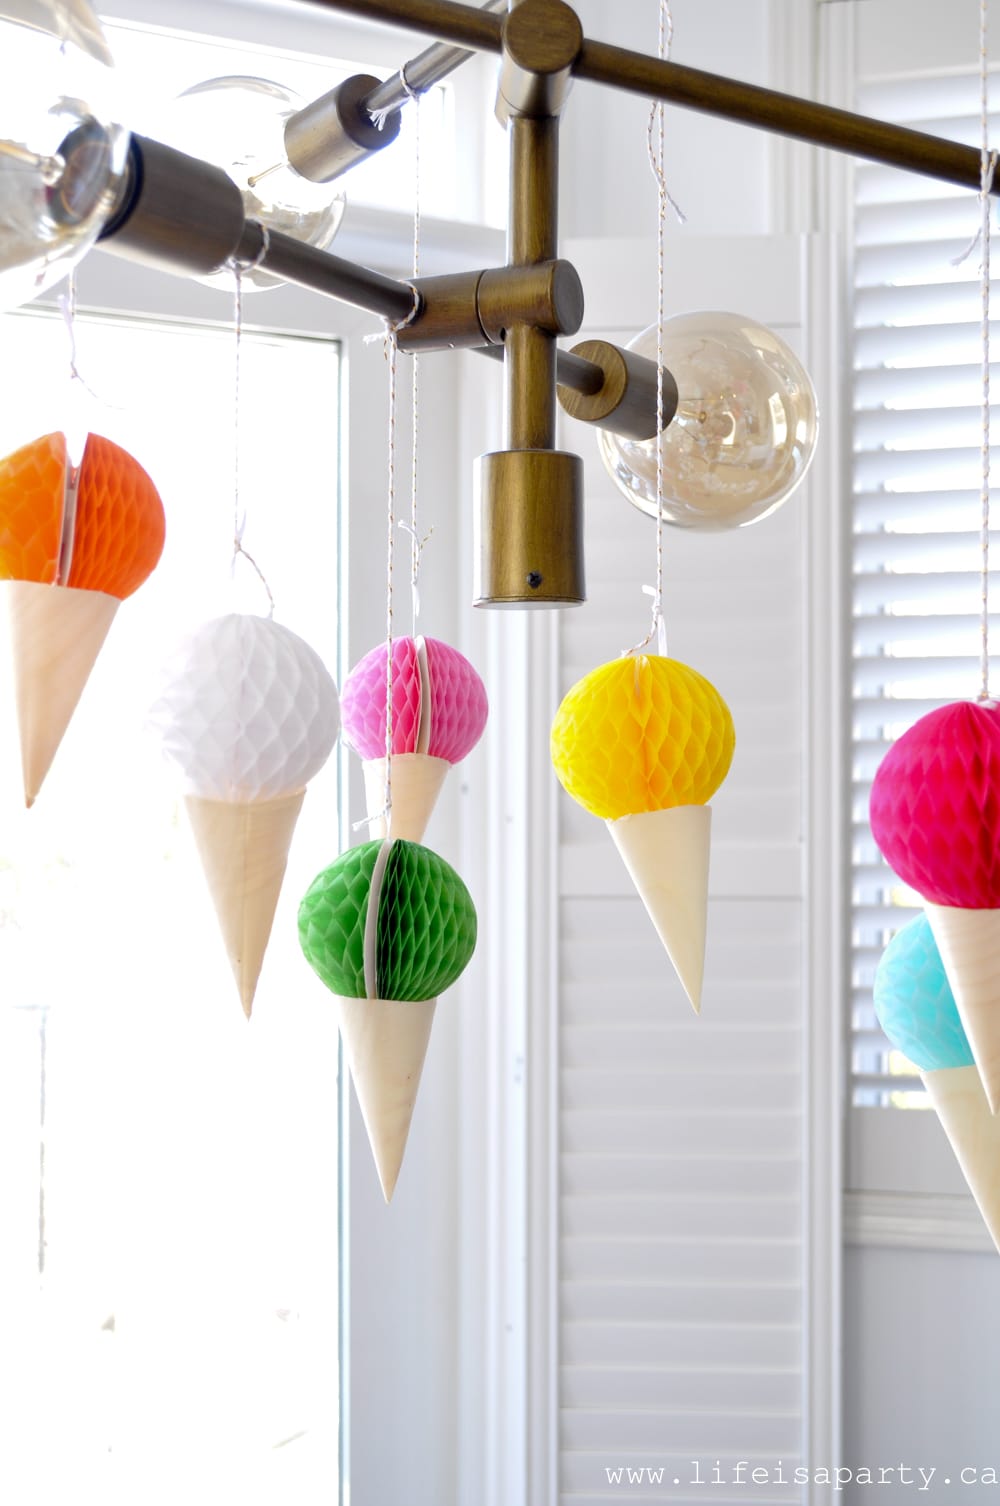 Ice Cream Themed Party Decorations: easy, DIY, inexpensive and colourful ice cream decoations like our ice cream cone dessert table backdrop, and ice cream cone bunting.